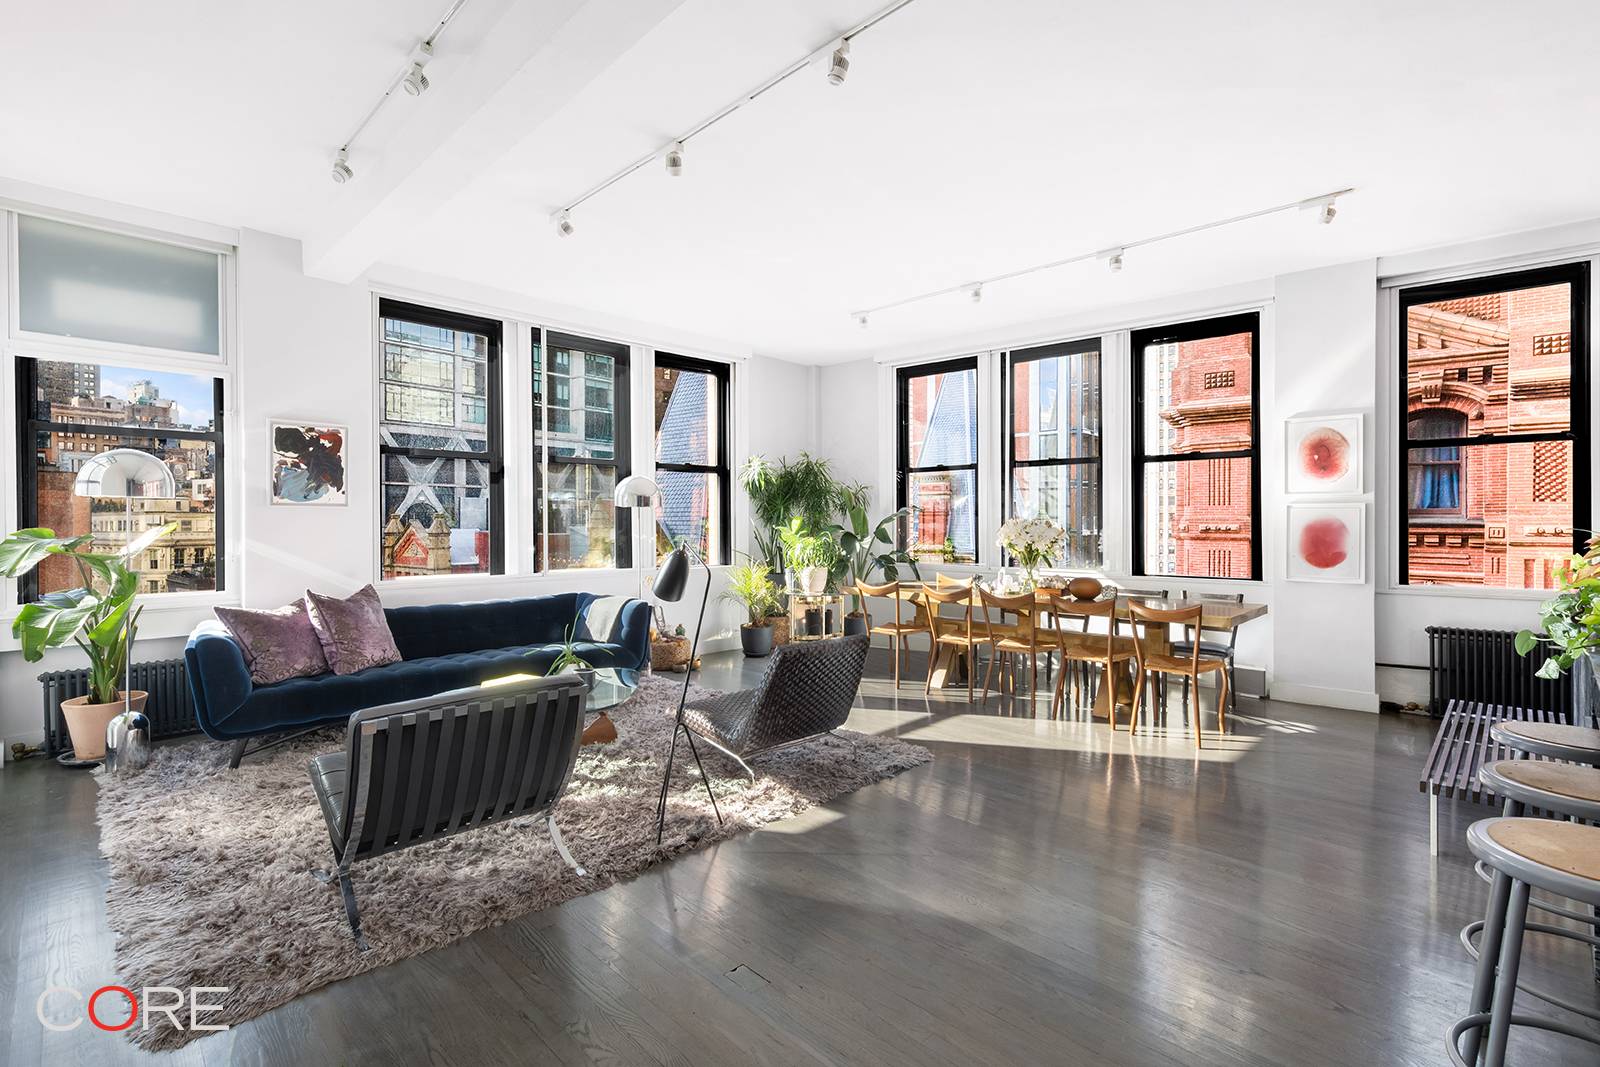 Immaculately designed by Mark Foster Gage Architects, welcome home to this magnificently renovated and authentic two bedroom, two bathroom loft wrapped in 13 oversized windows, bathed in beautiful natural light, ...